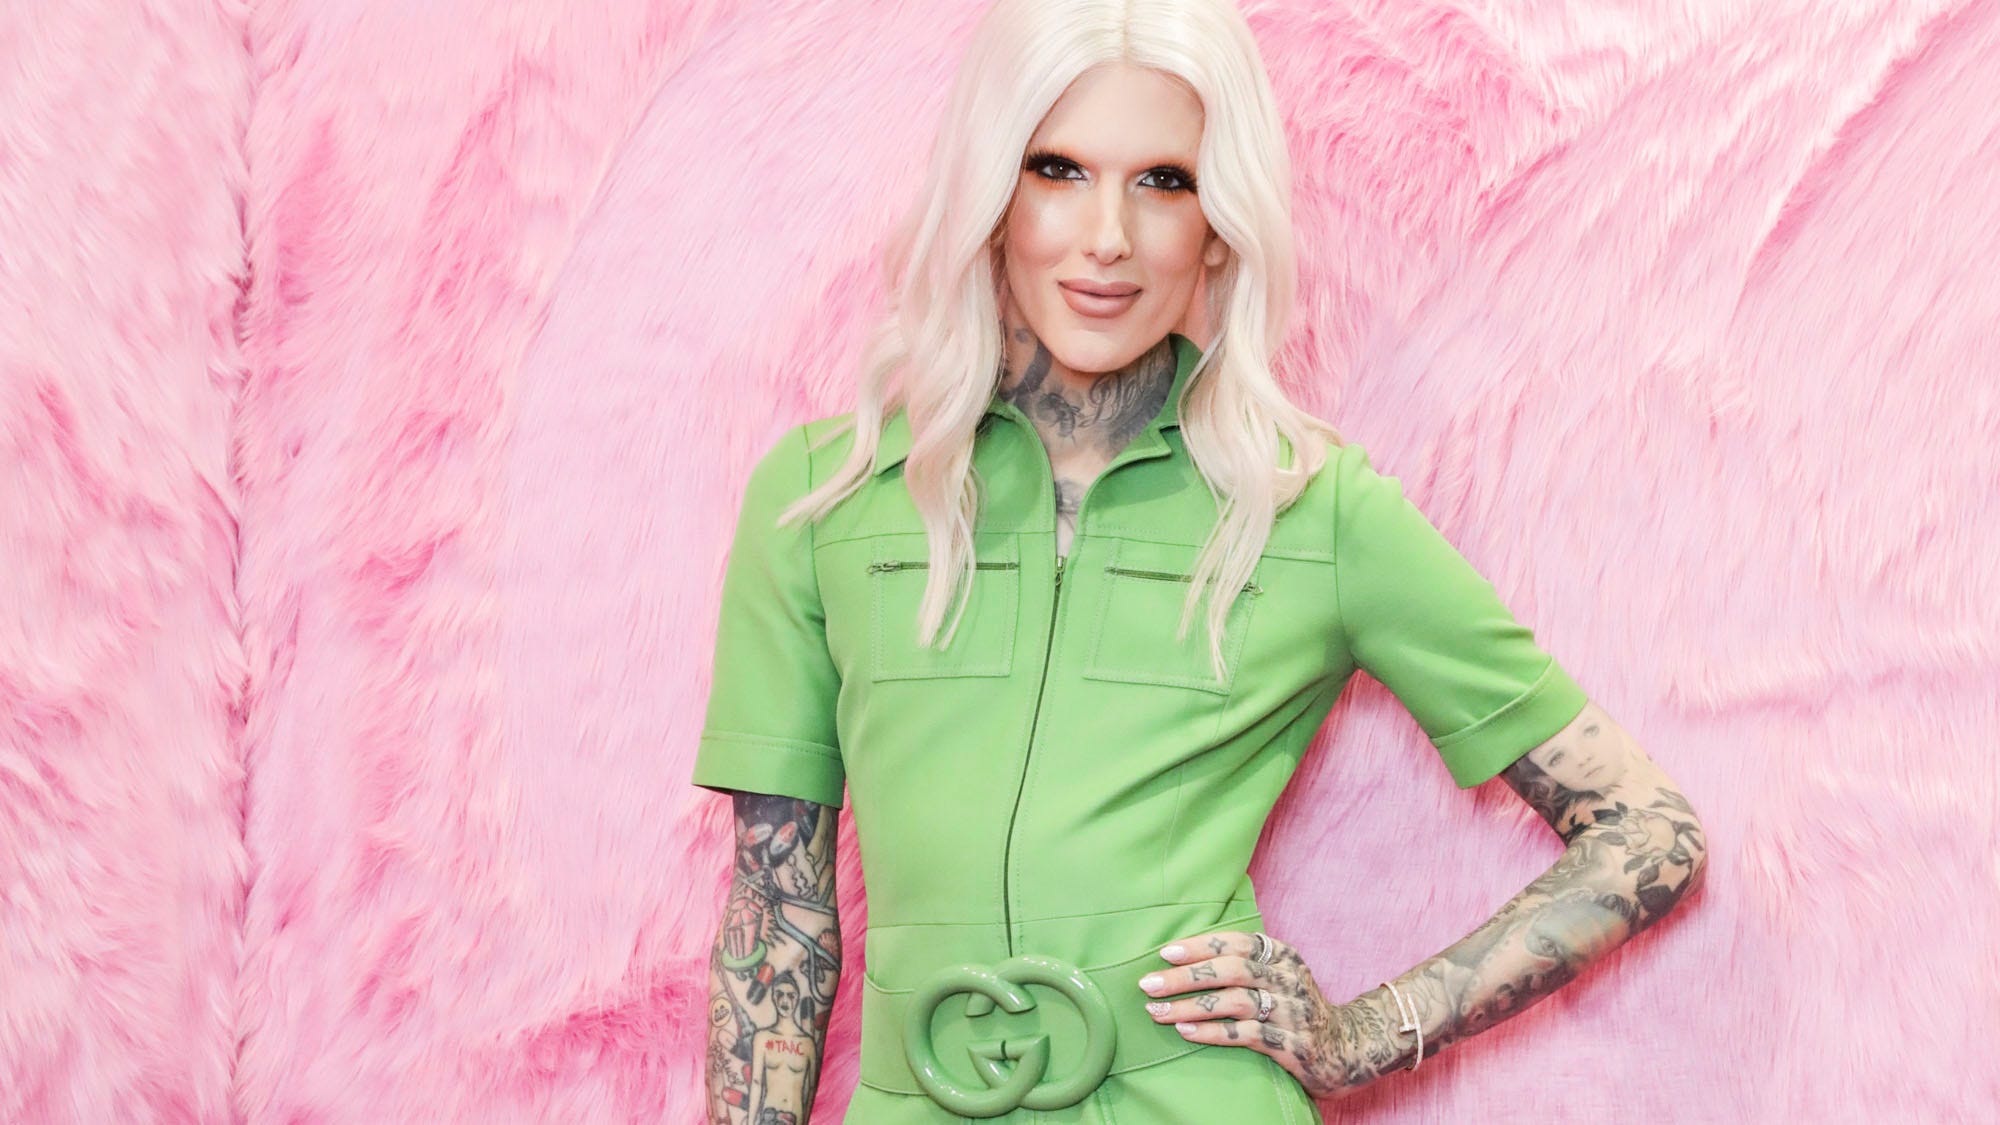 Jeffree Star was admitted to hospital after ‘serious car accident’ that overturned the vehicle three times